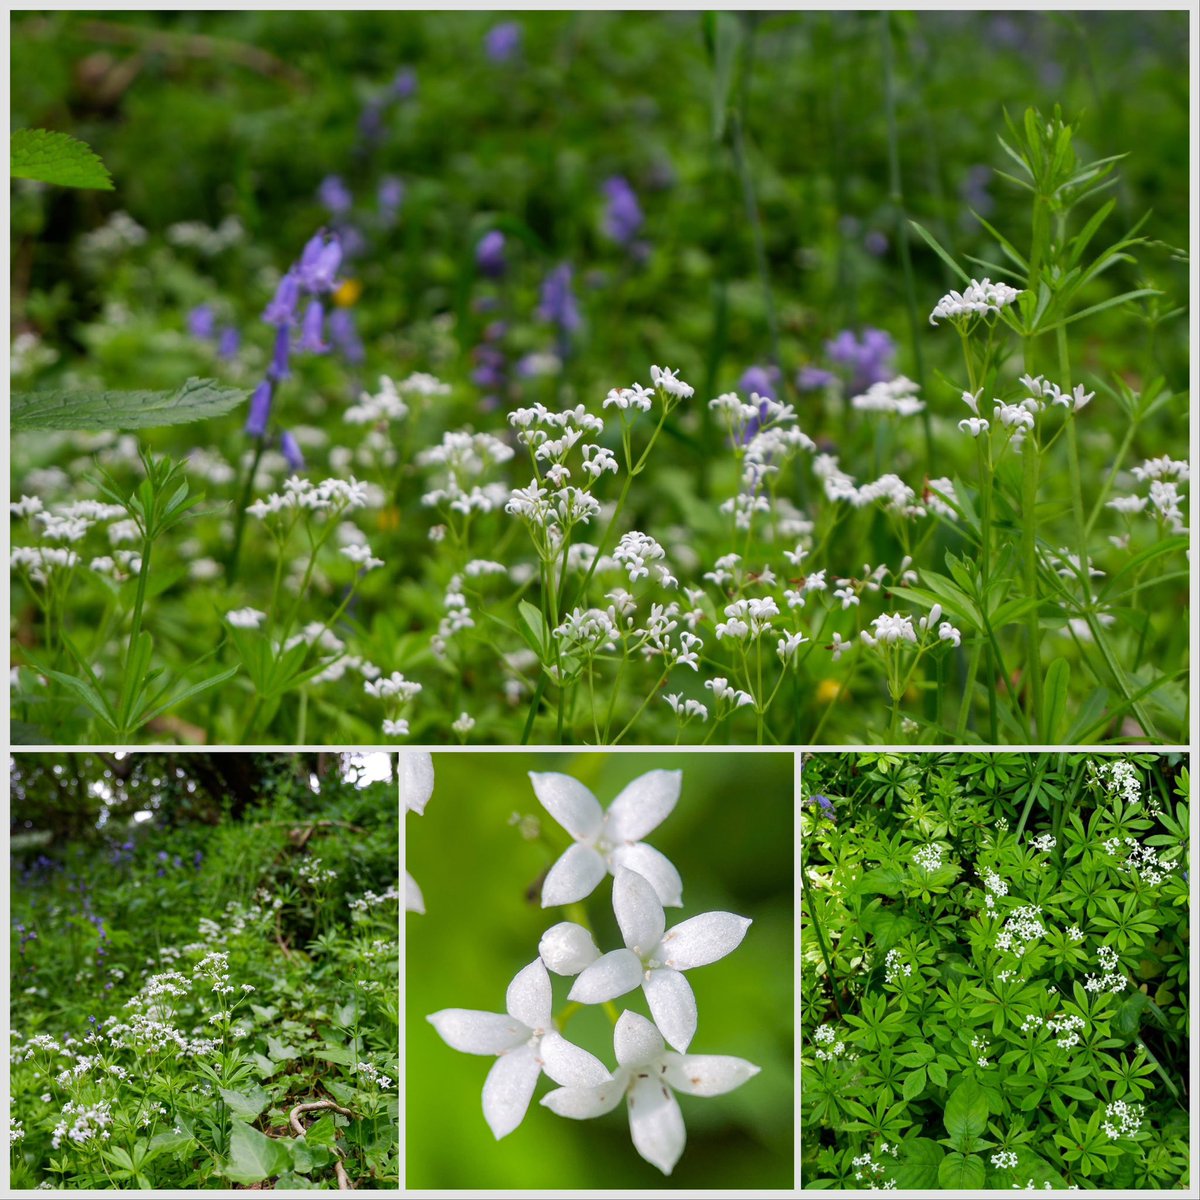 #wildfloweroftheday #sweetwoodruff #galliumodoratum This little bundle of joy really does live up to its name. Whorls of fresh green leaves and little white puffs of cloud like flowers! #woodruff #wildflowerlove #wildflowers #ancientwoodland #AWI #npms #woodland #Somerset #Wells